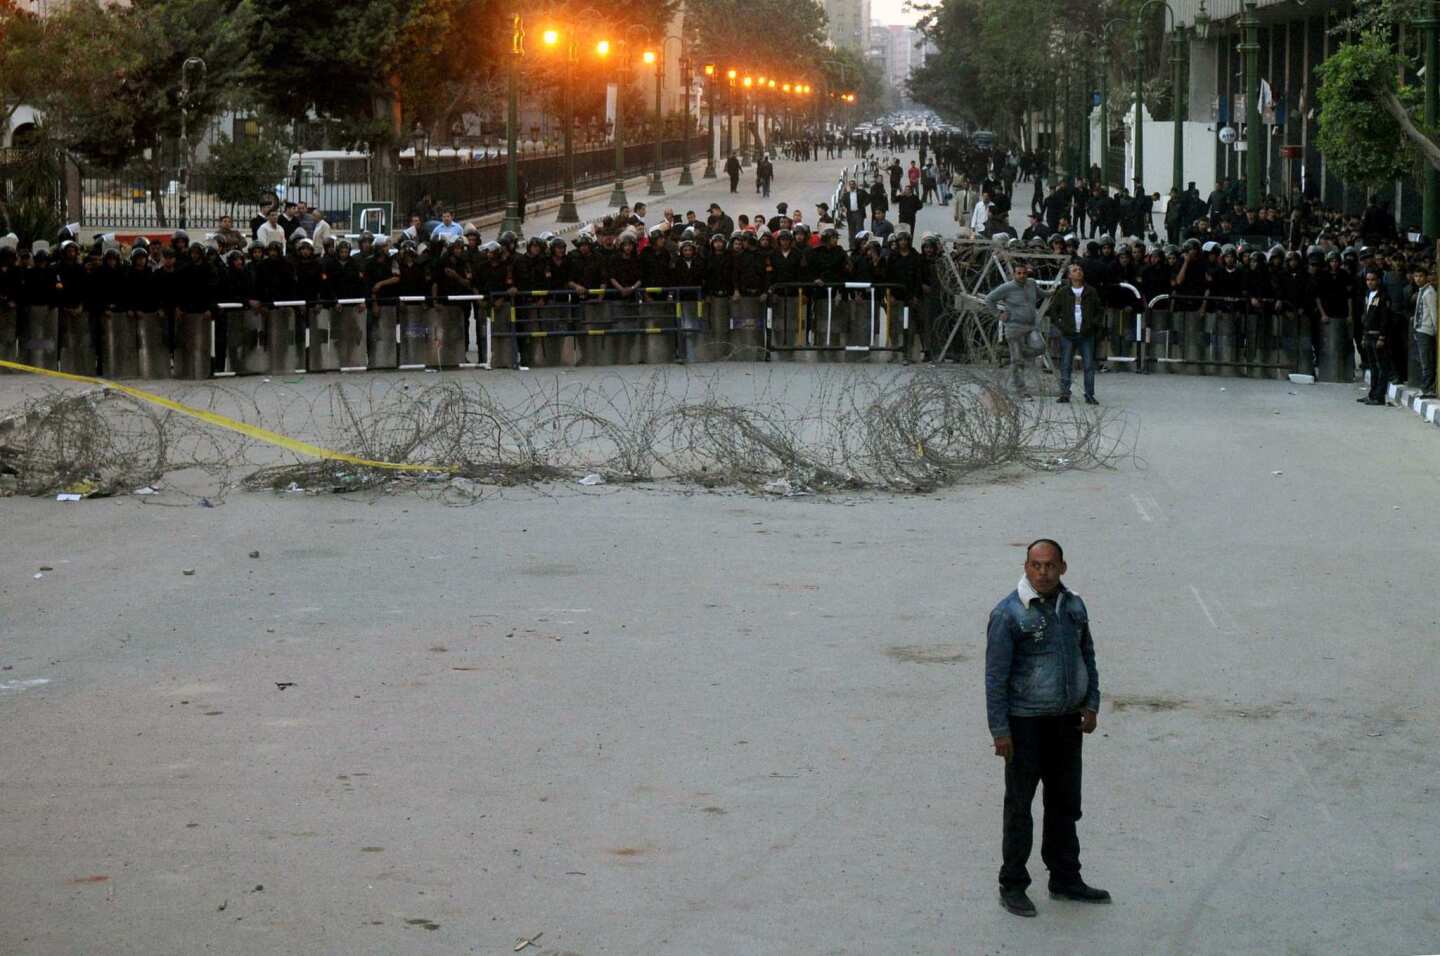 Egyptian police look on as a man watches protesters pull down the protective barricade made of cement blocks along Qasr el-Eine street which lead to Tahrir Square, the epicenter of the Egyptian revolution which saw last year's overthrow of president Hosni Mubarak